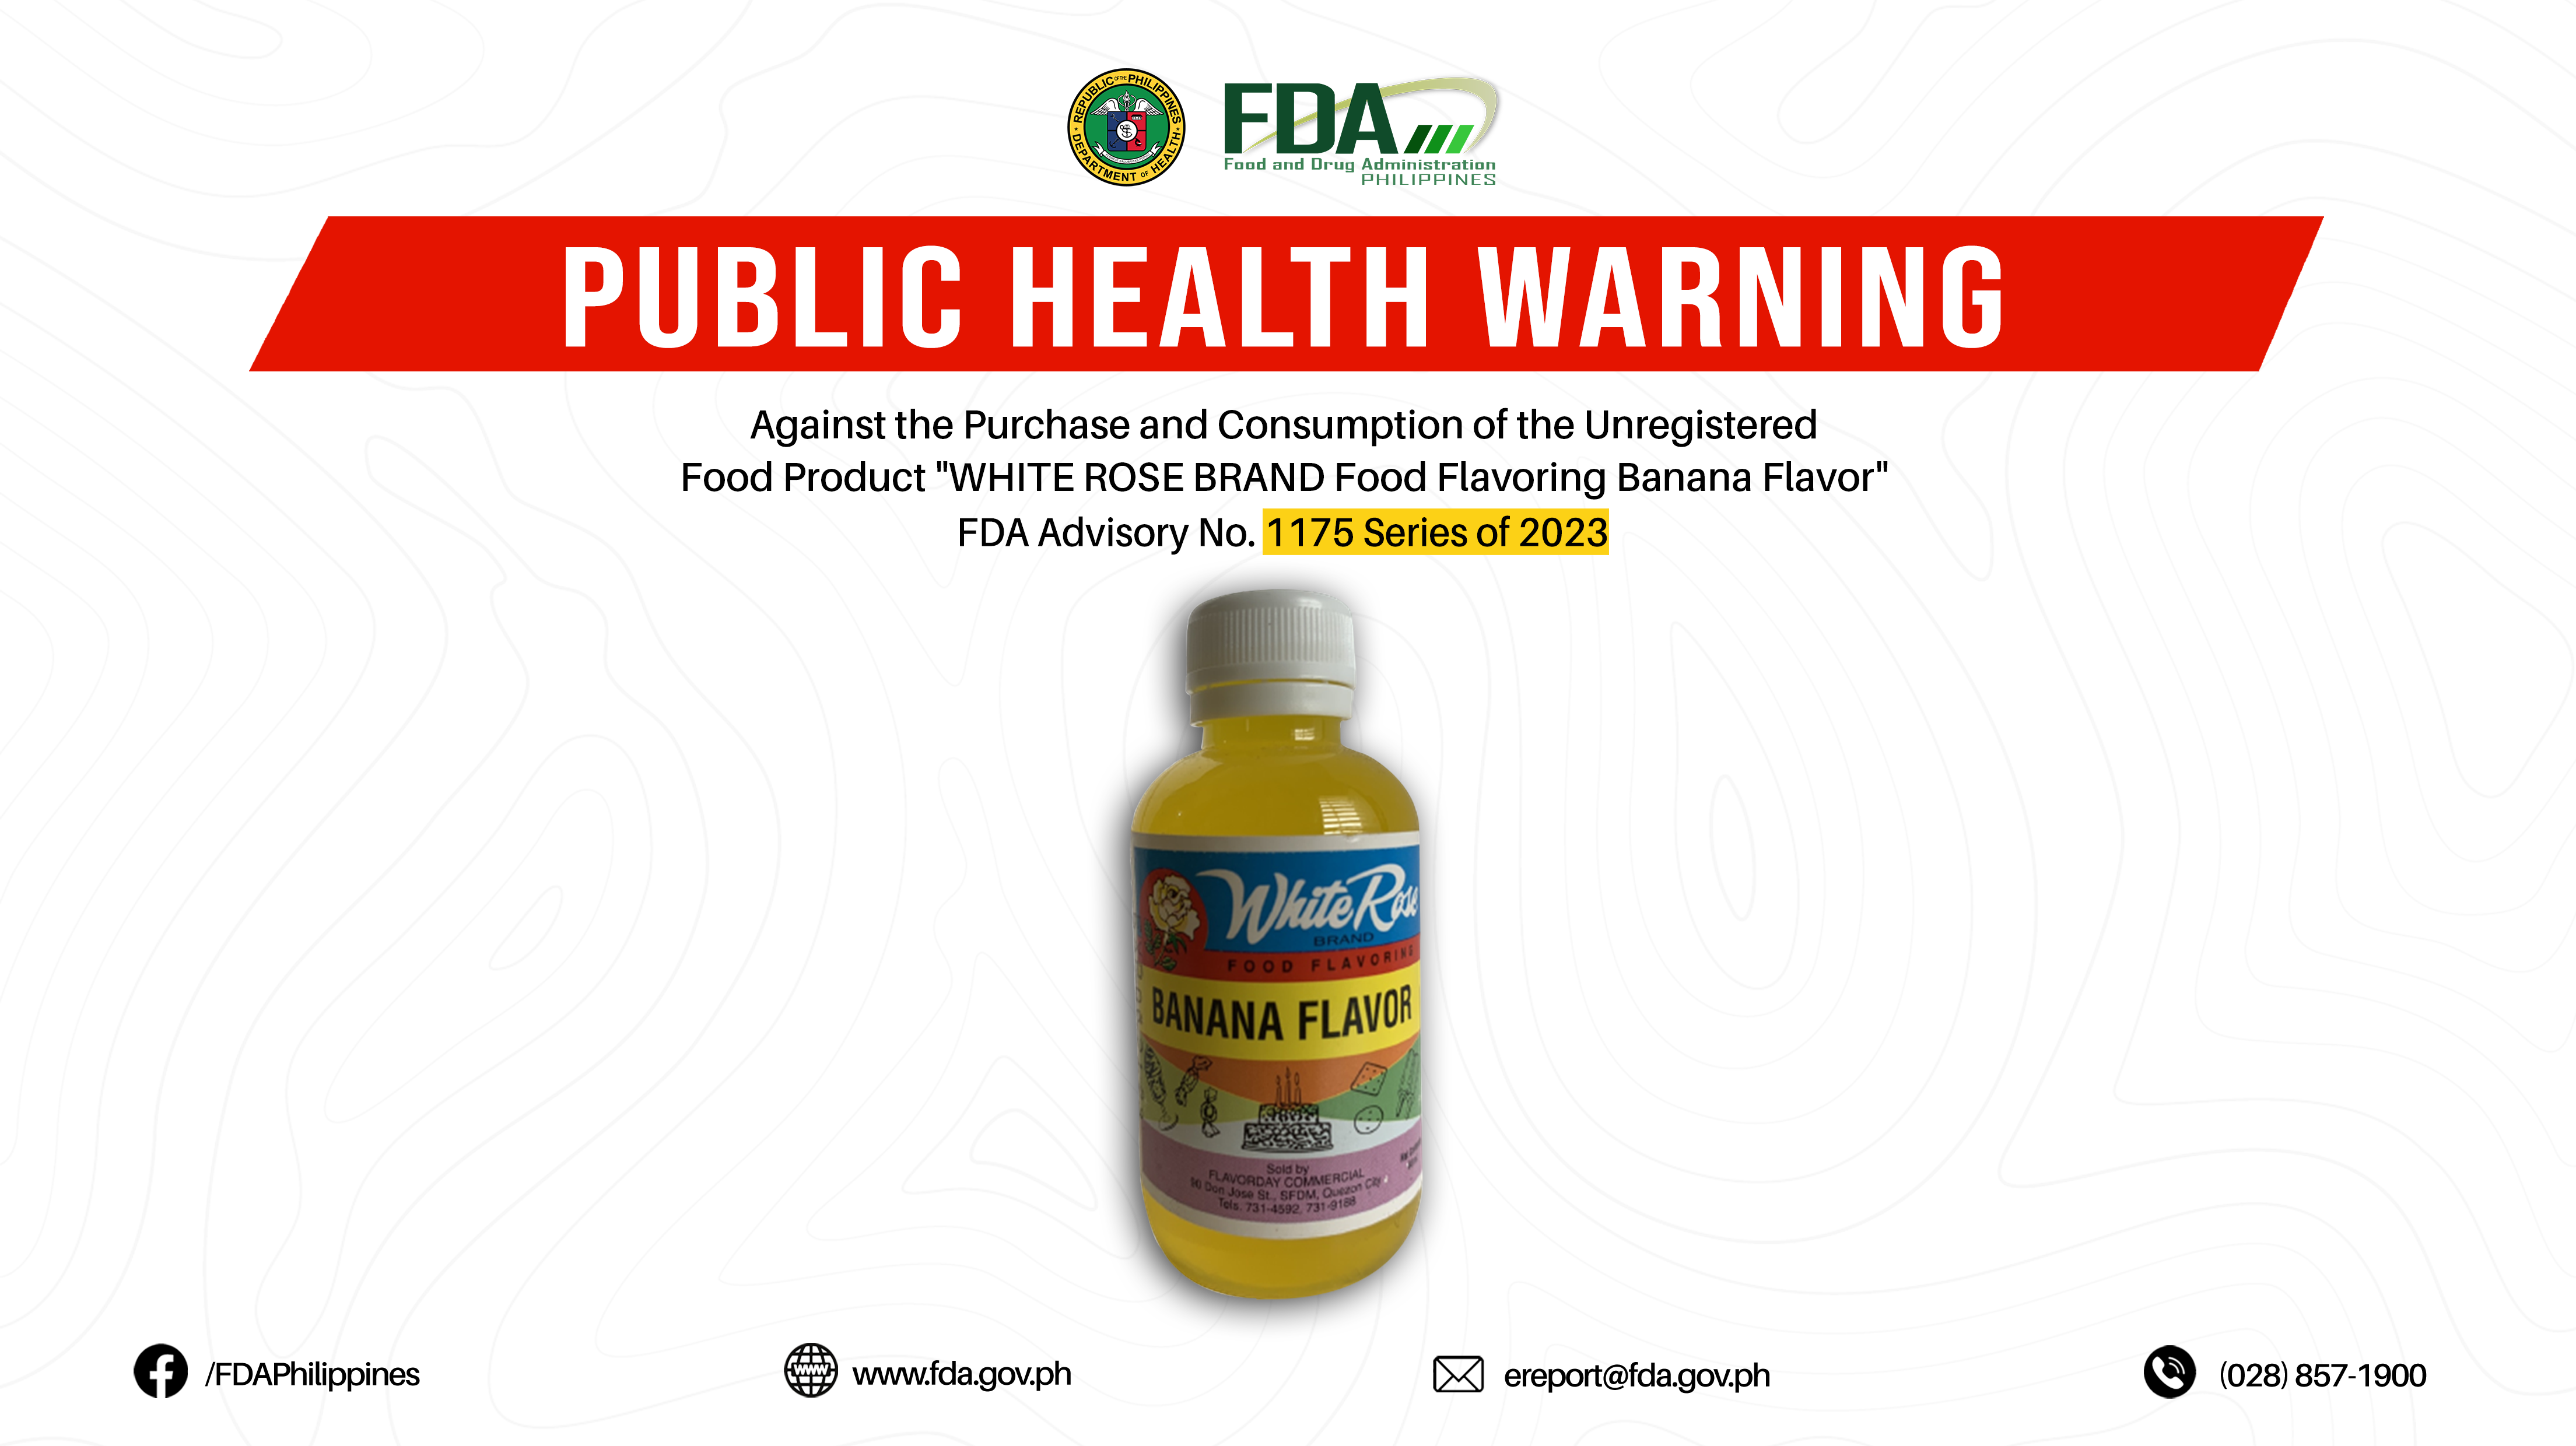 FDA Advisory No.2023-1175 || Public Health Warning Against the Purchase and Consumption of the Unregistered Food Product “WHITE ROSE BRAND Food Flavoring Banana Flavor”